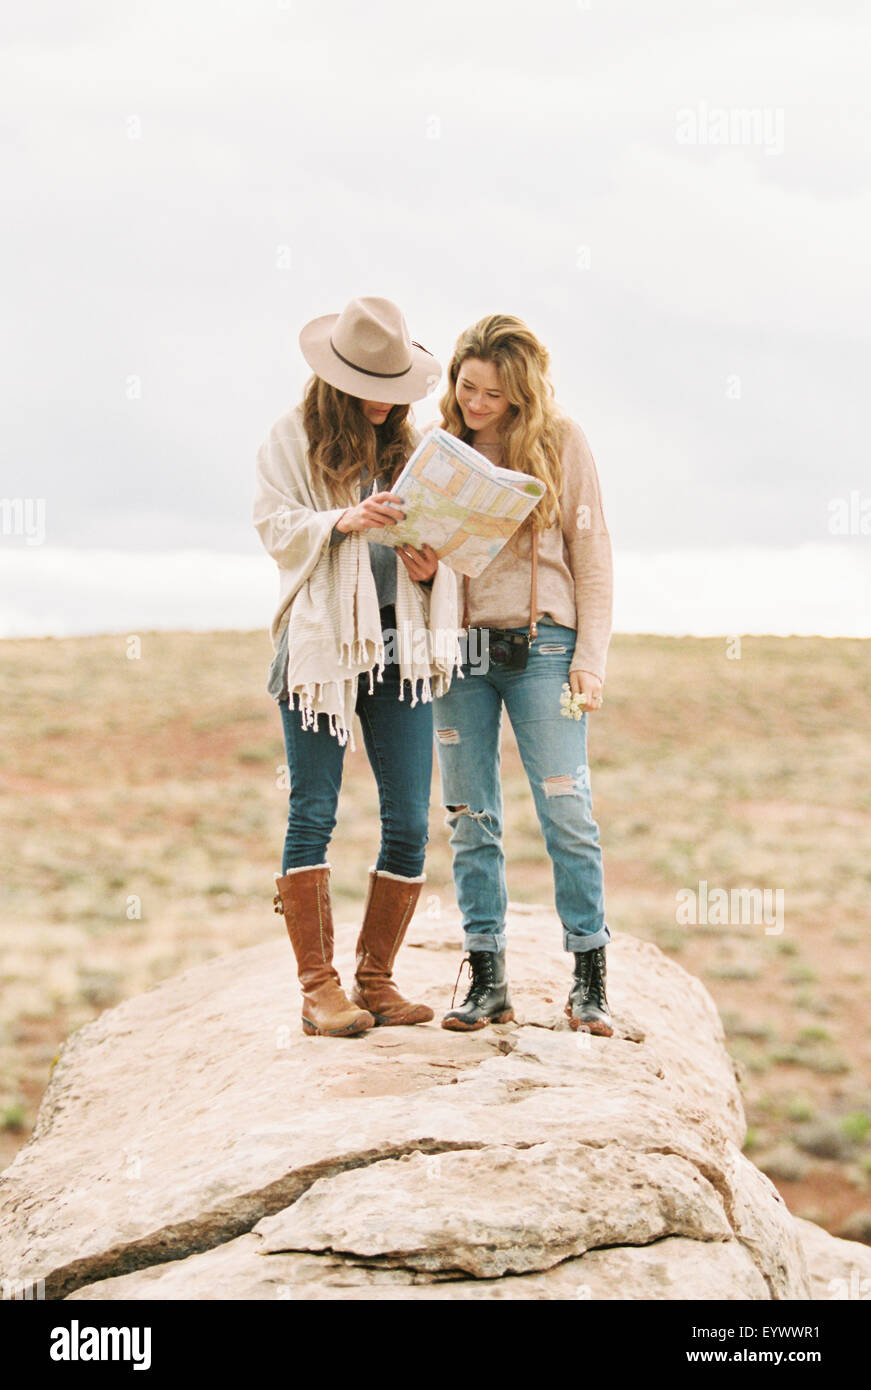 Two women standing in a desert, studying a map. Stock Photo